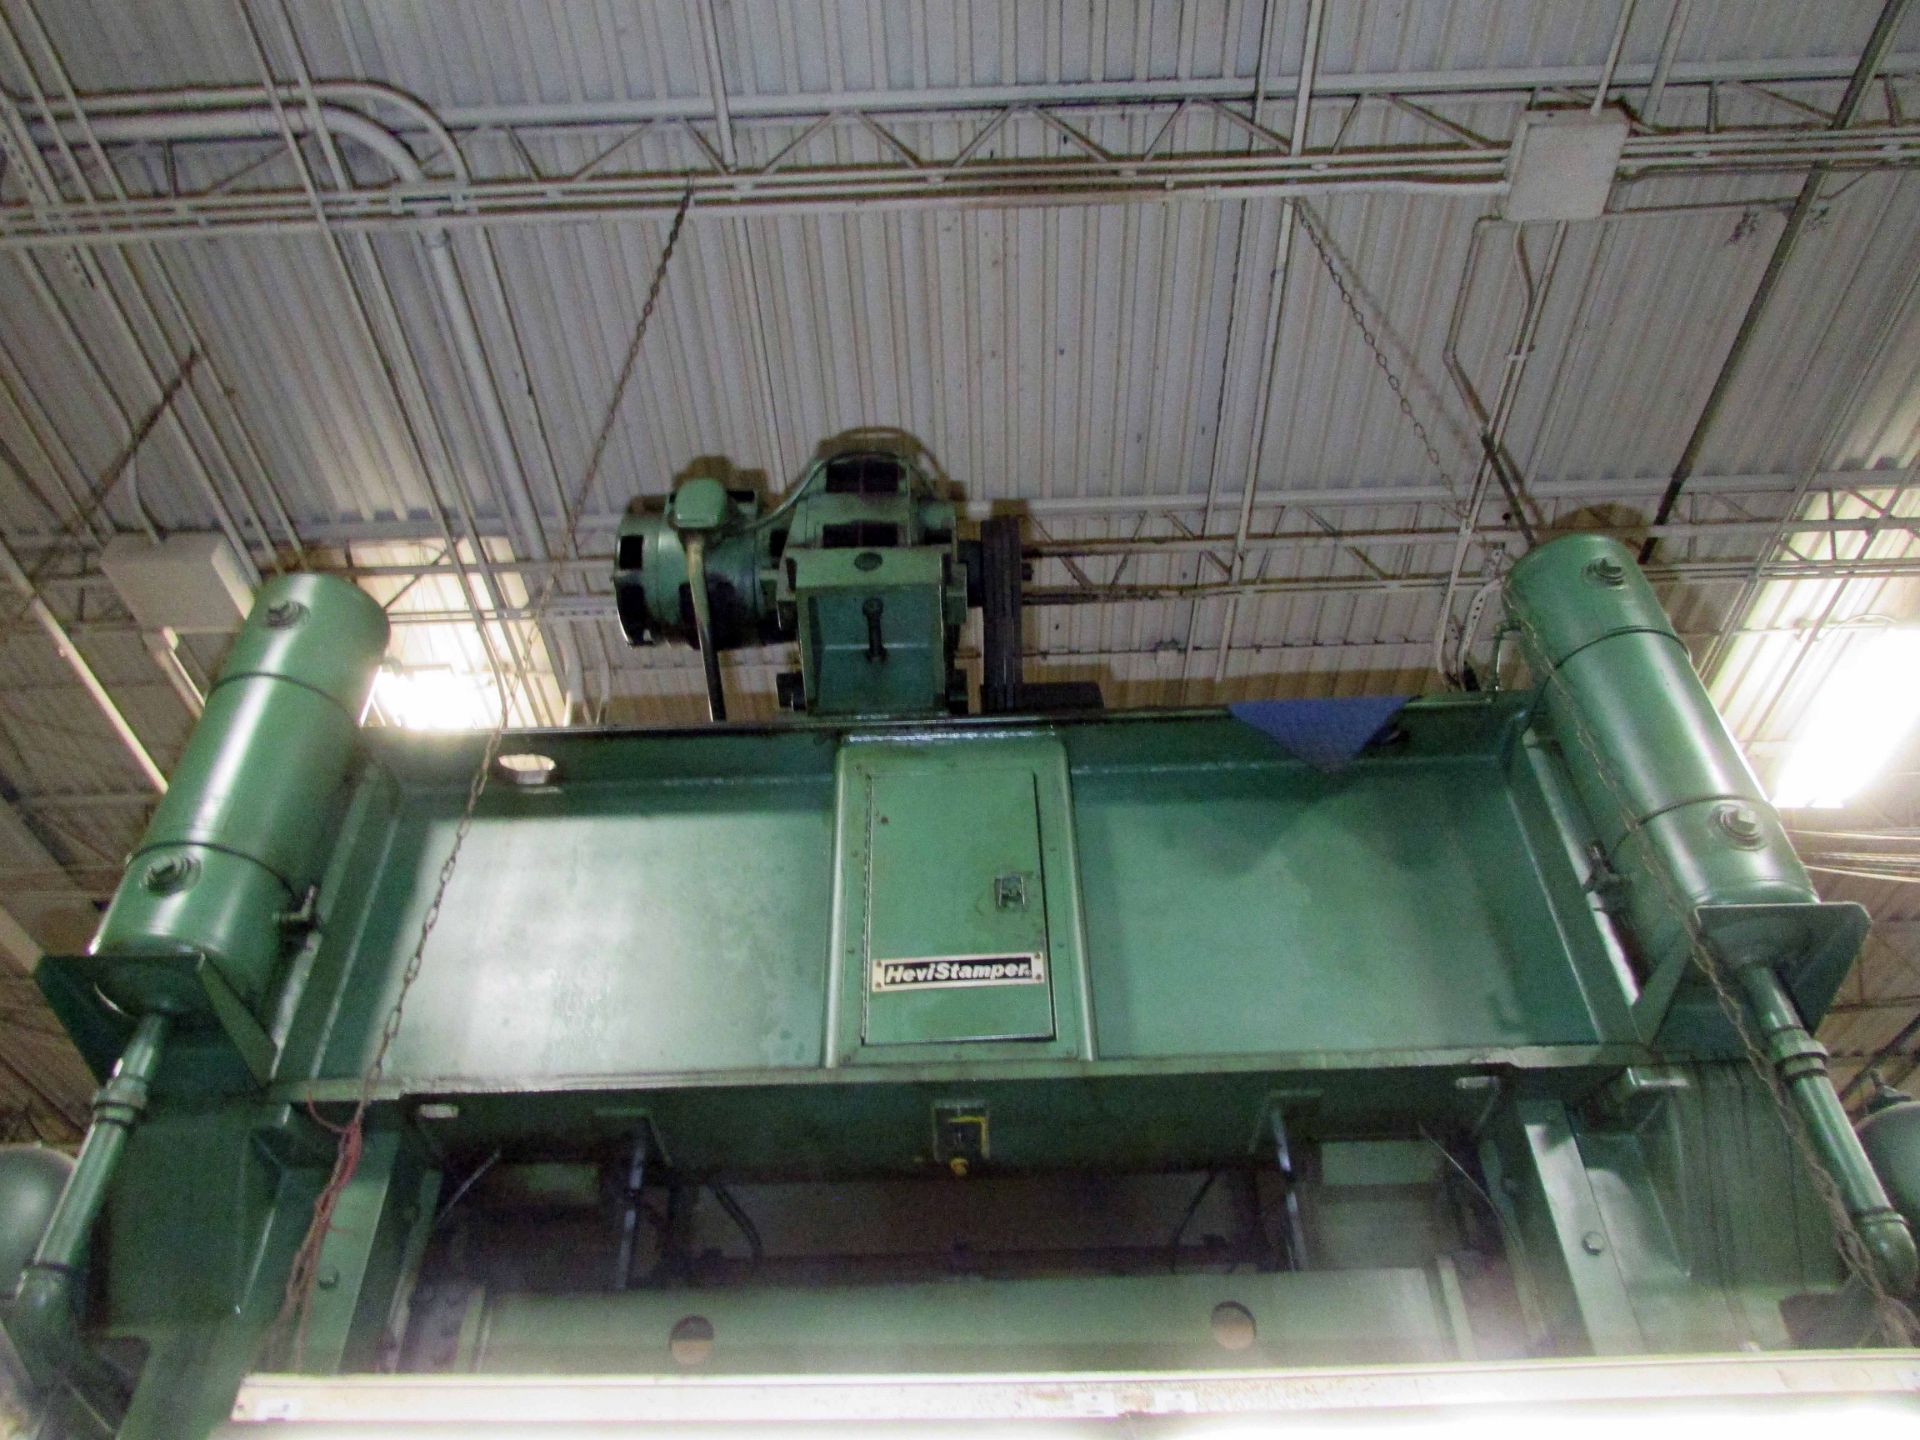 STRAIGHT SIDE 2-POINT ECCENTRIC GEARED PRESS, MINSTER 300 T. CAP. MDL. E2-300-96-48 “HEVI-STAMPER” - Image 9 of 23